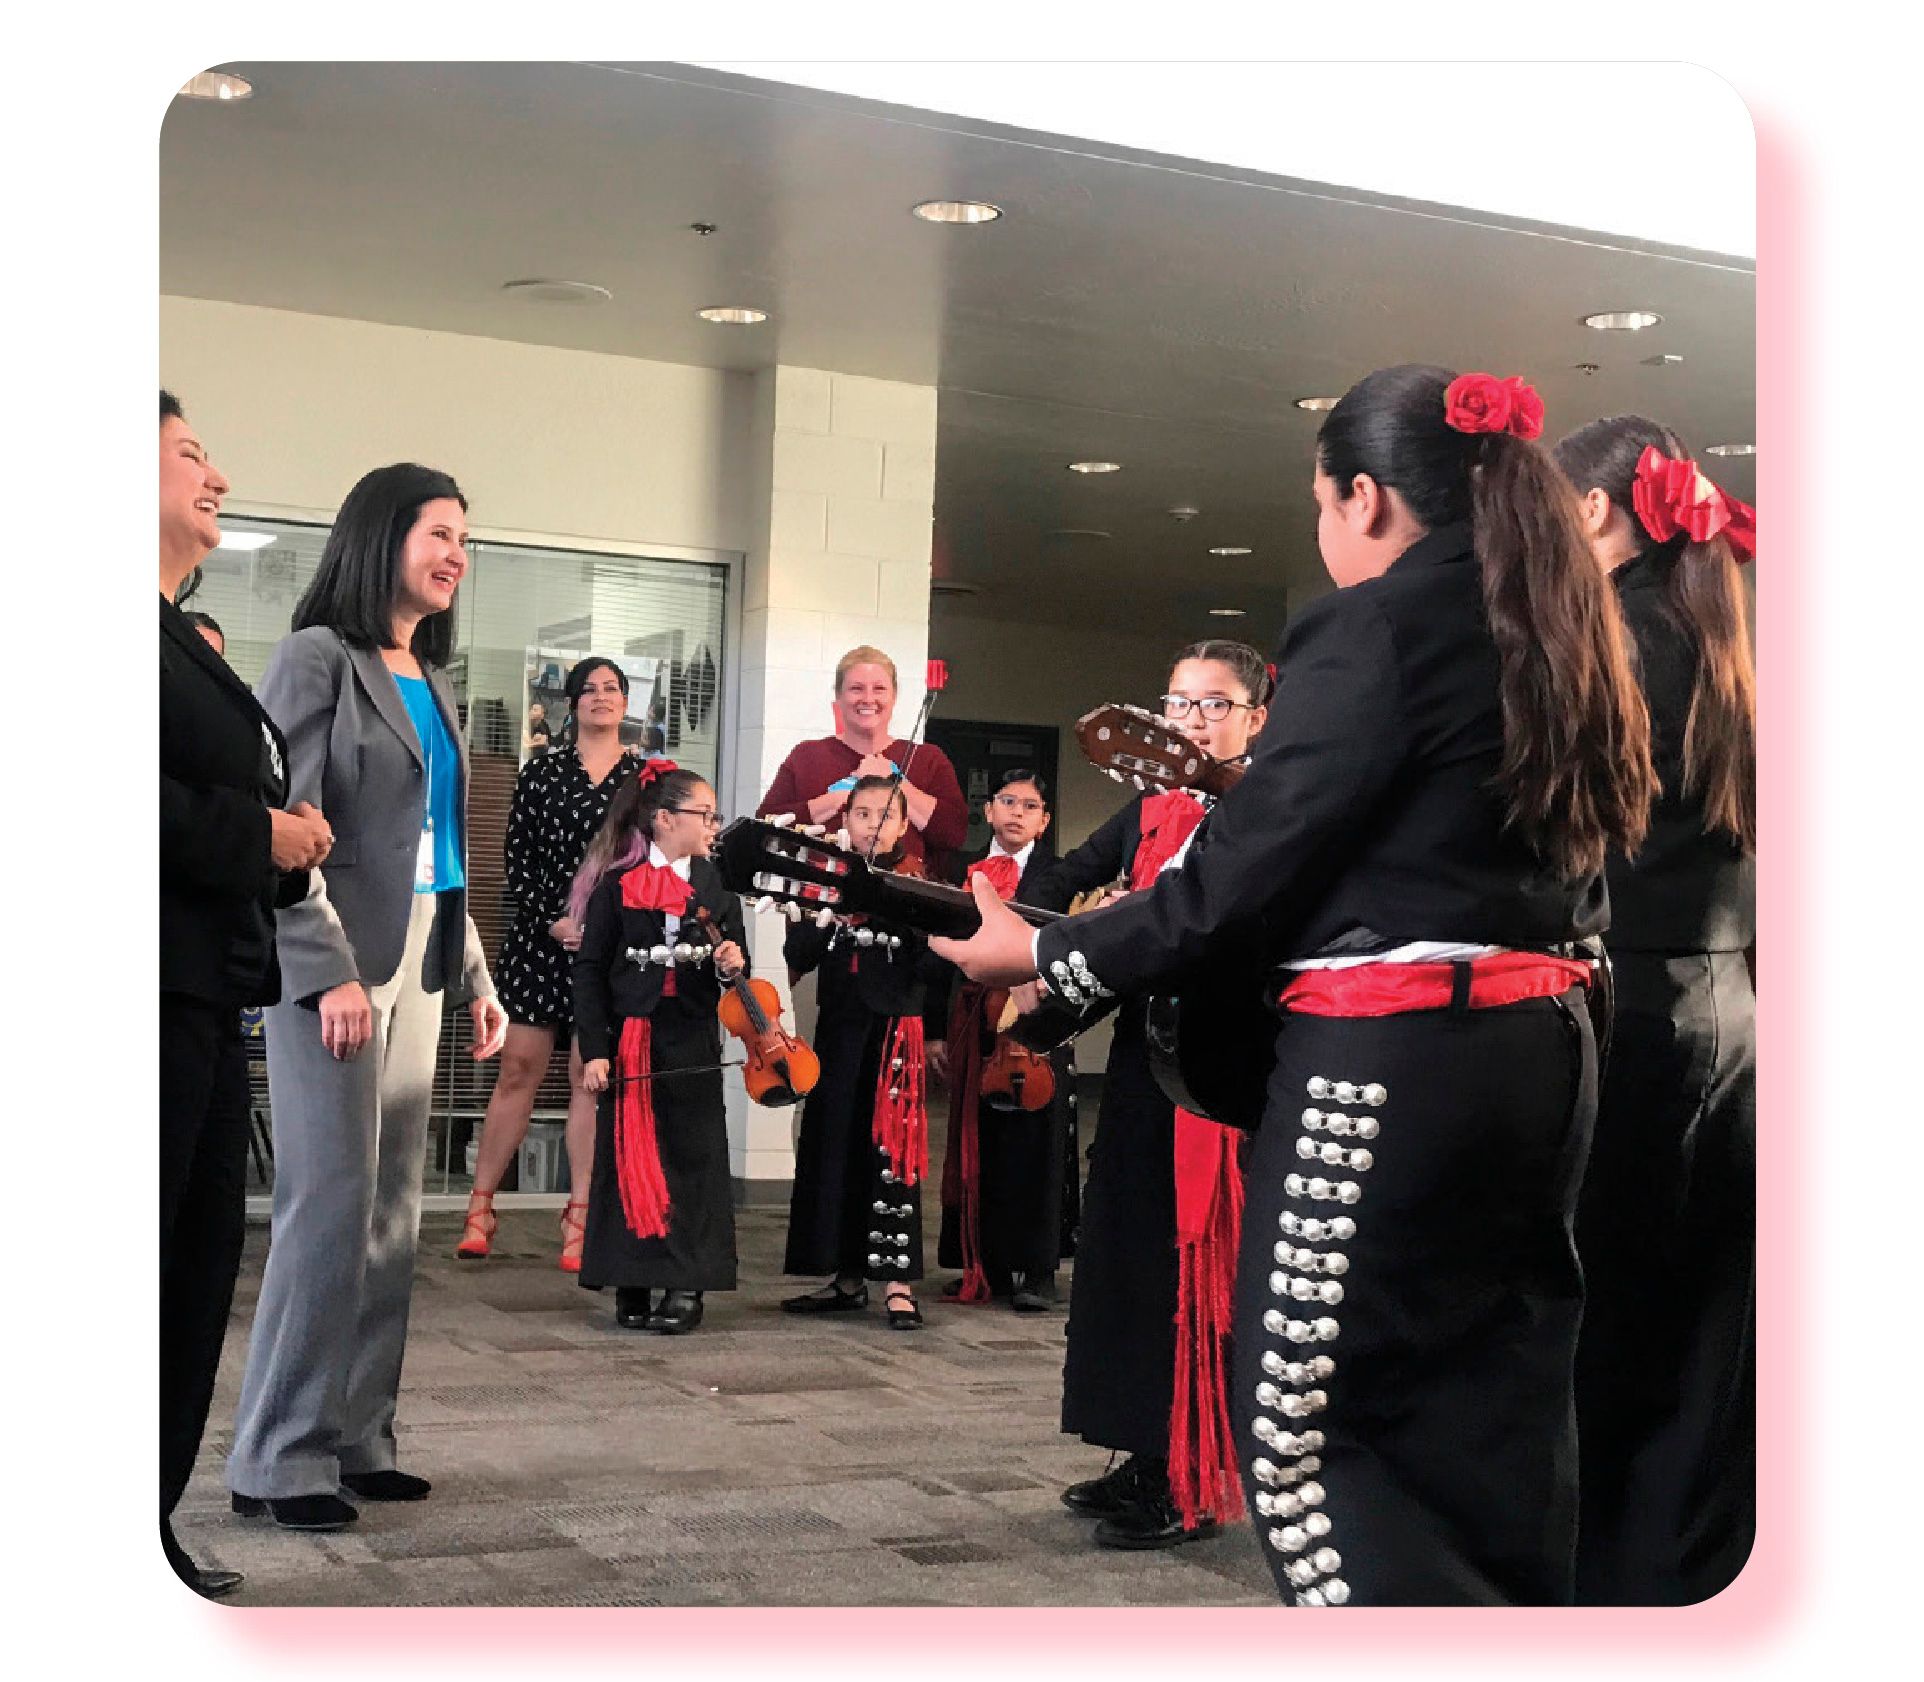 Dr. Hightower smiling as she enjoys a performance from one of Tolleson ESD's award-winning student mariachi bands.